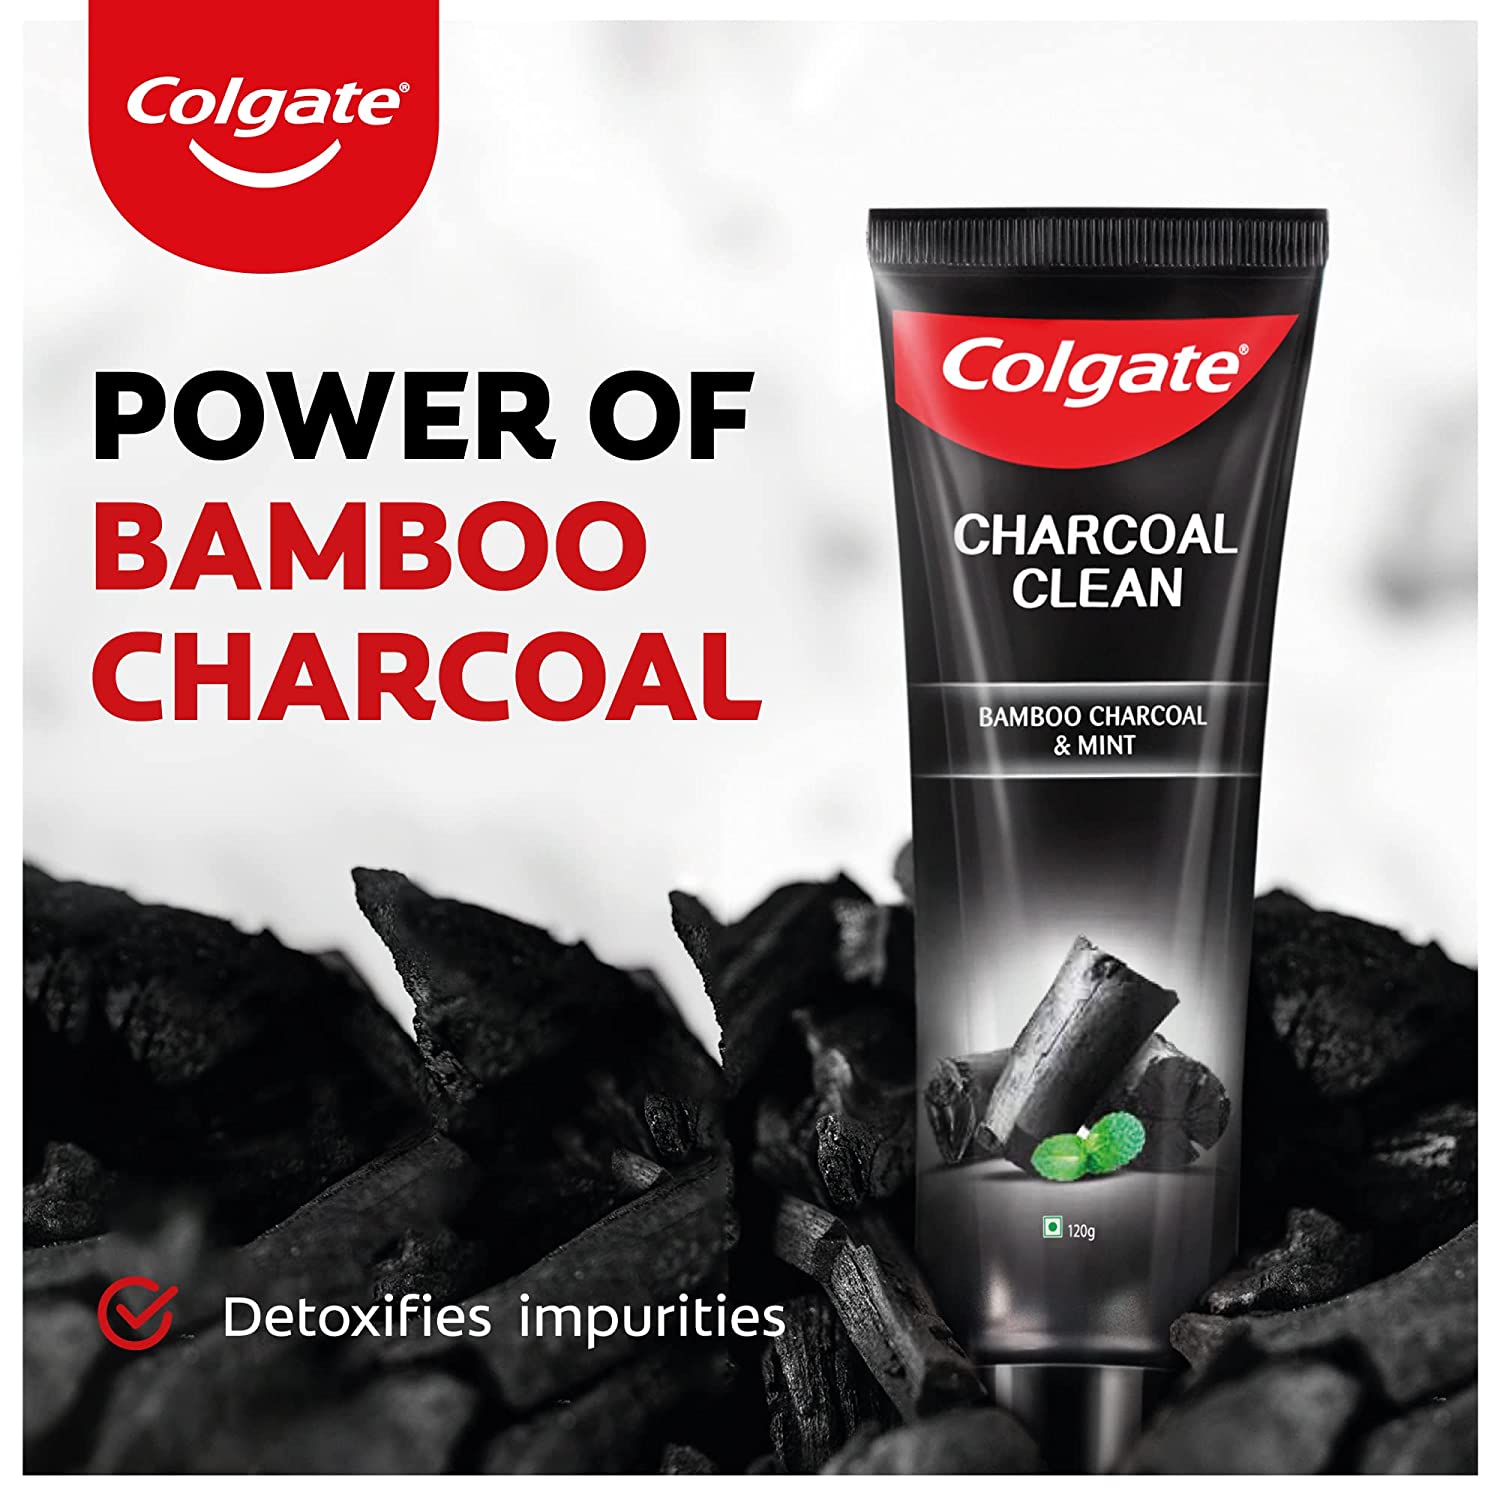 Colgate Charcoal Clean Black Gel Toothpaste Pack of 120g Deep Clean  Colgate Toothpaste With Bamboo Charcoal Wintergreen Mint For Plaque  Removal,